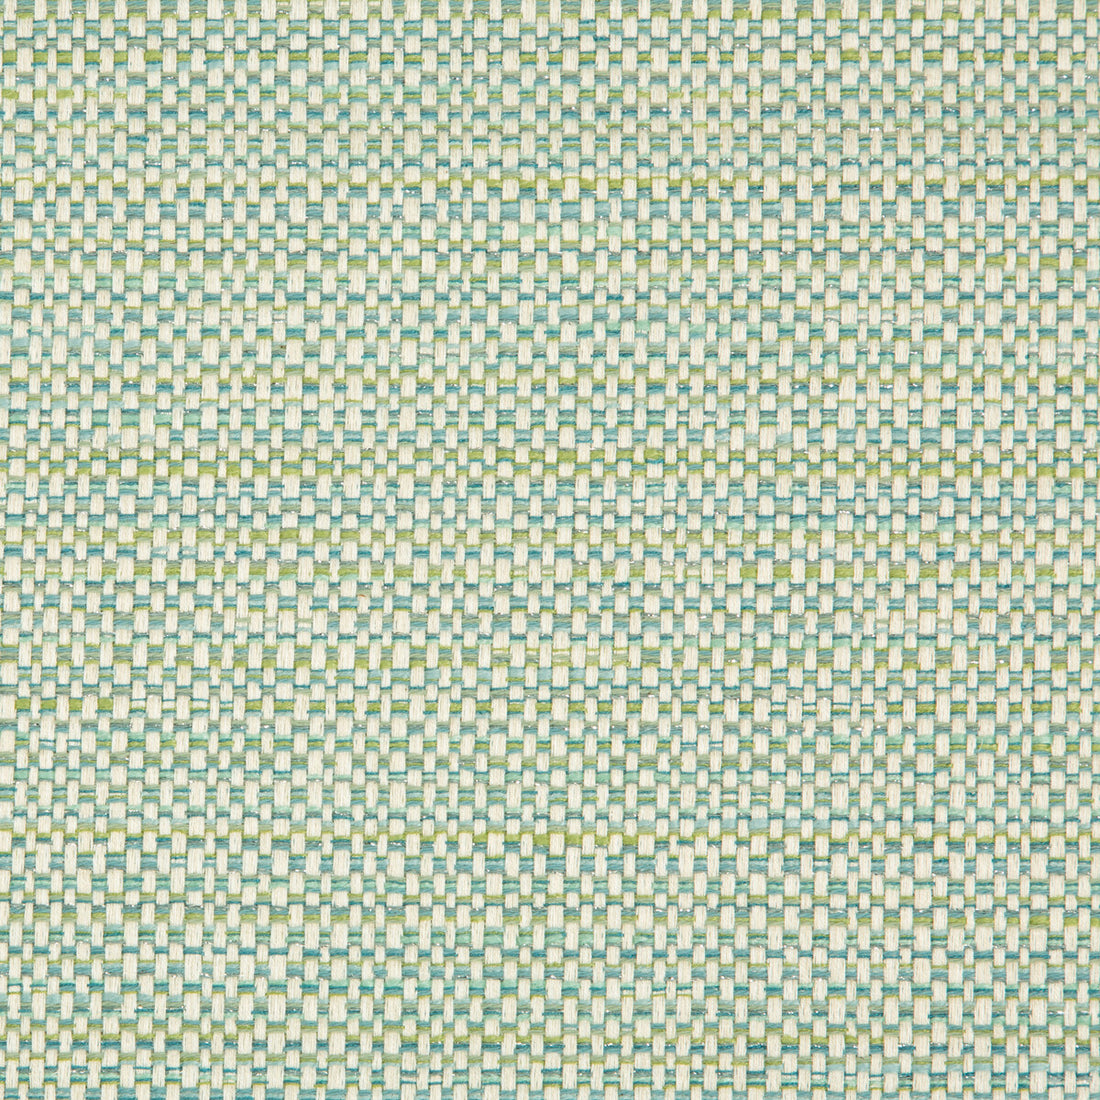 Kravet Design fabric in 34683-23 color - pattern 34683.23.0 - by Kravet Design in the Crypton Home collection